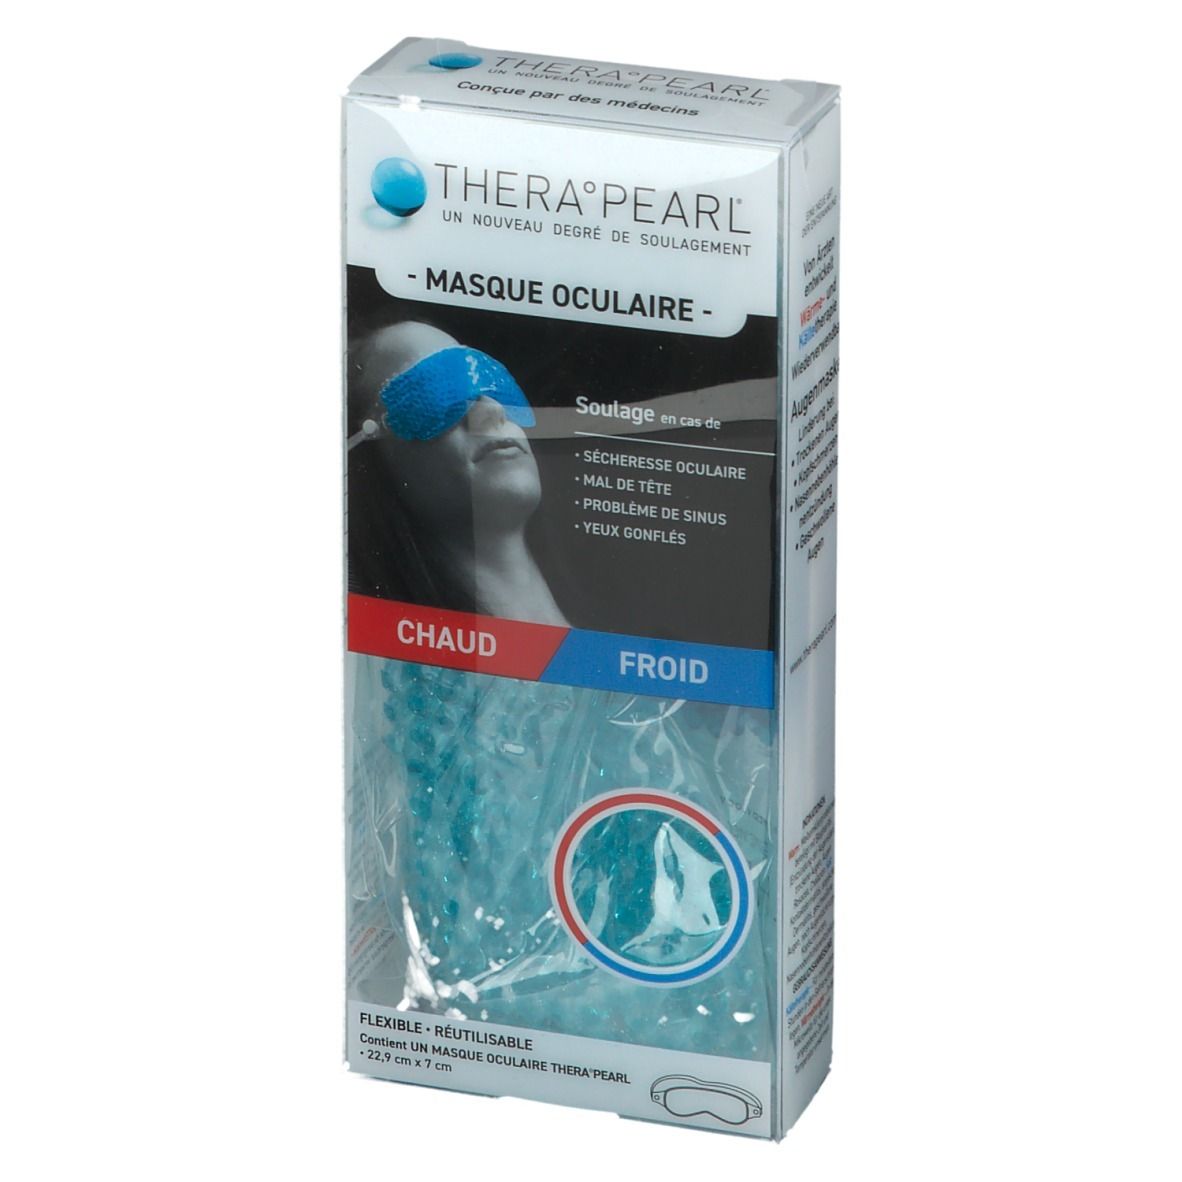 TheraPearl compresse chaud froid masque oculaire